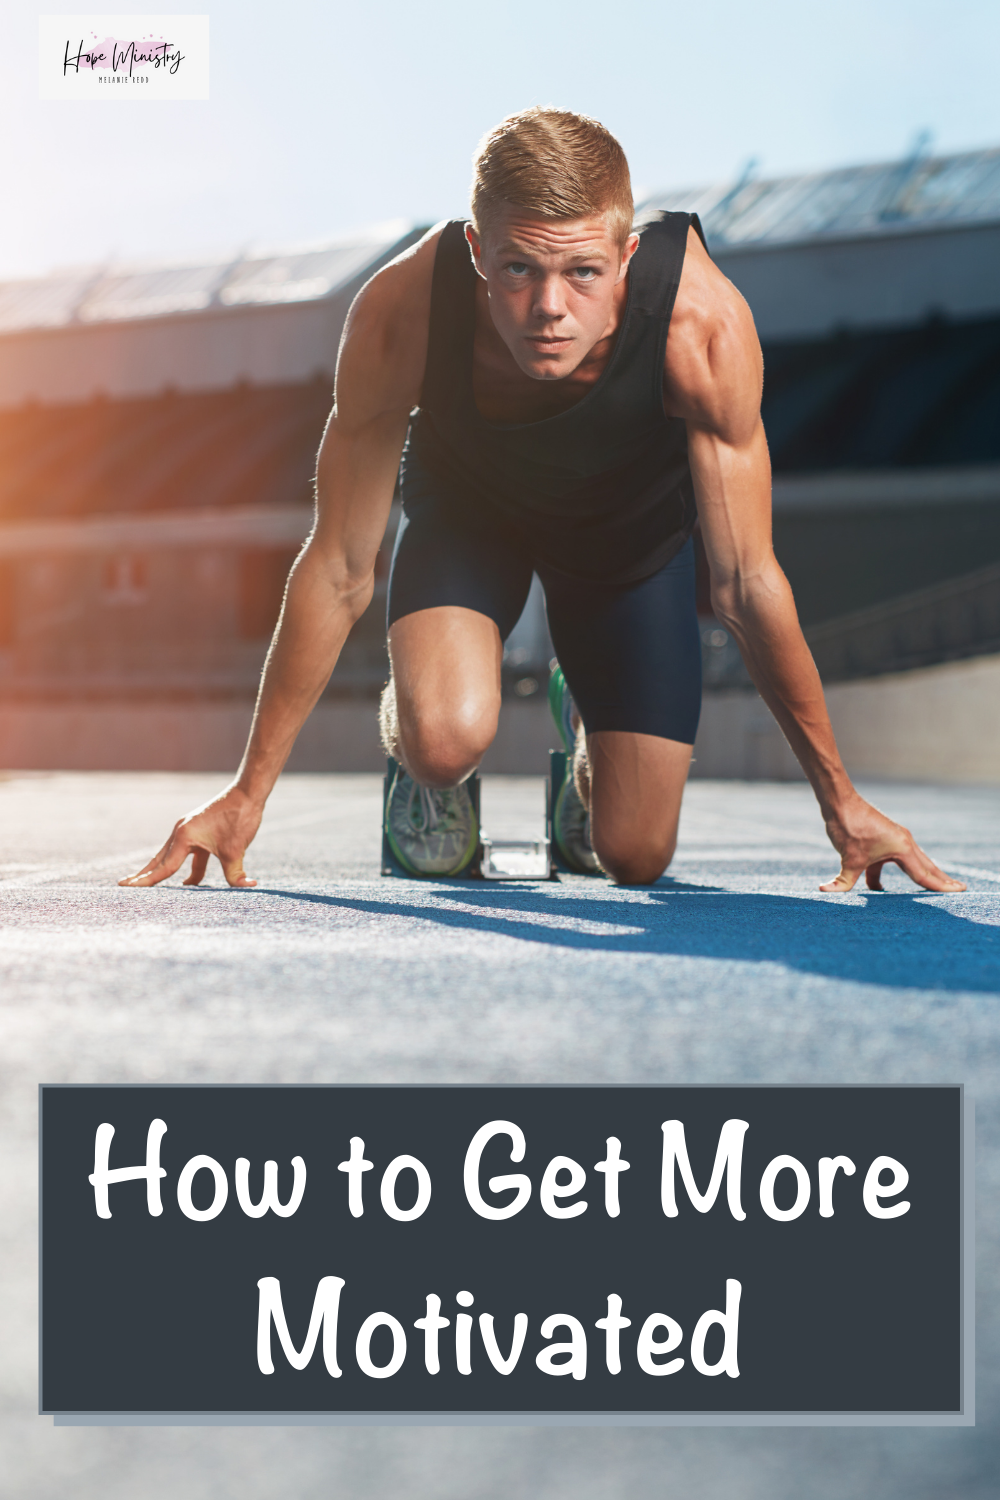 At times, we all need a little encouragement to keep pressing forward. Here are some suggestions for how to get more motivated.